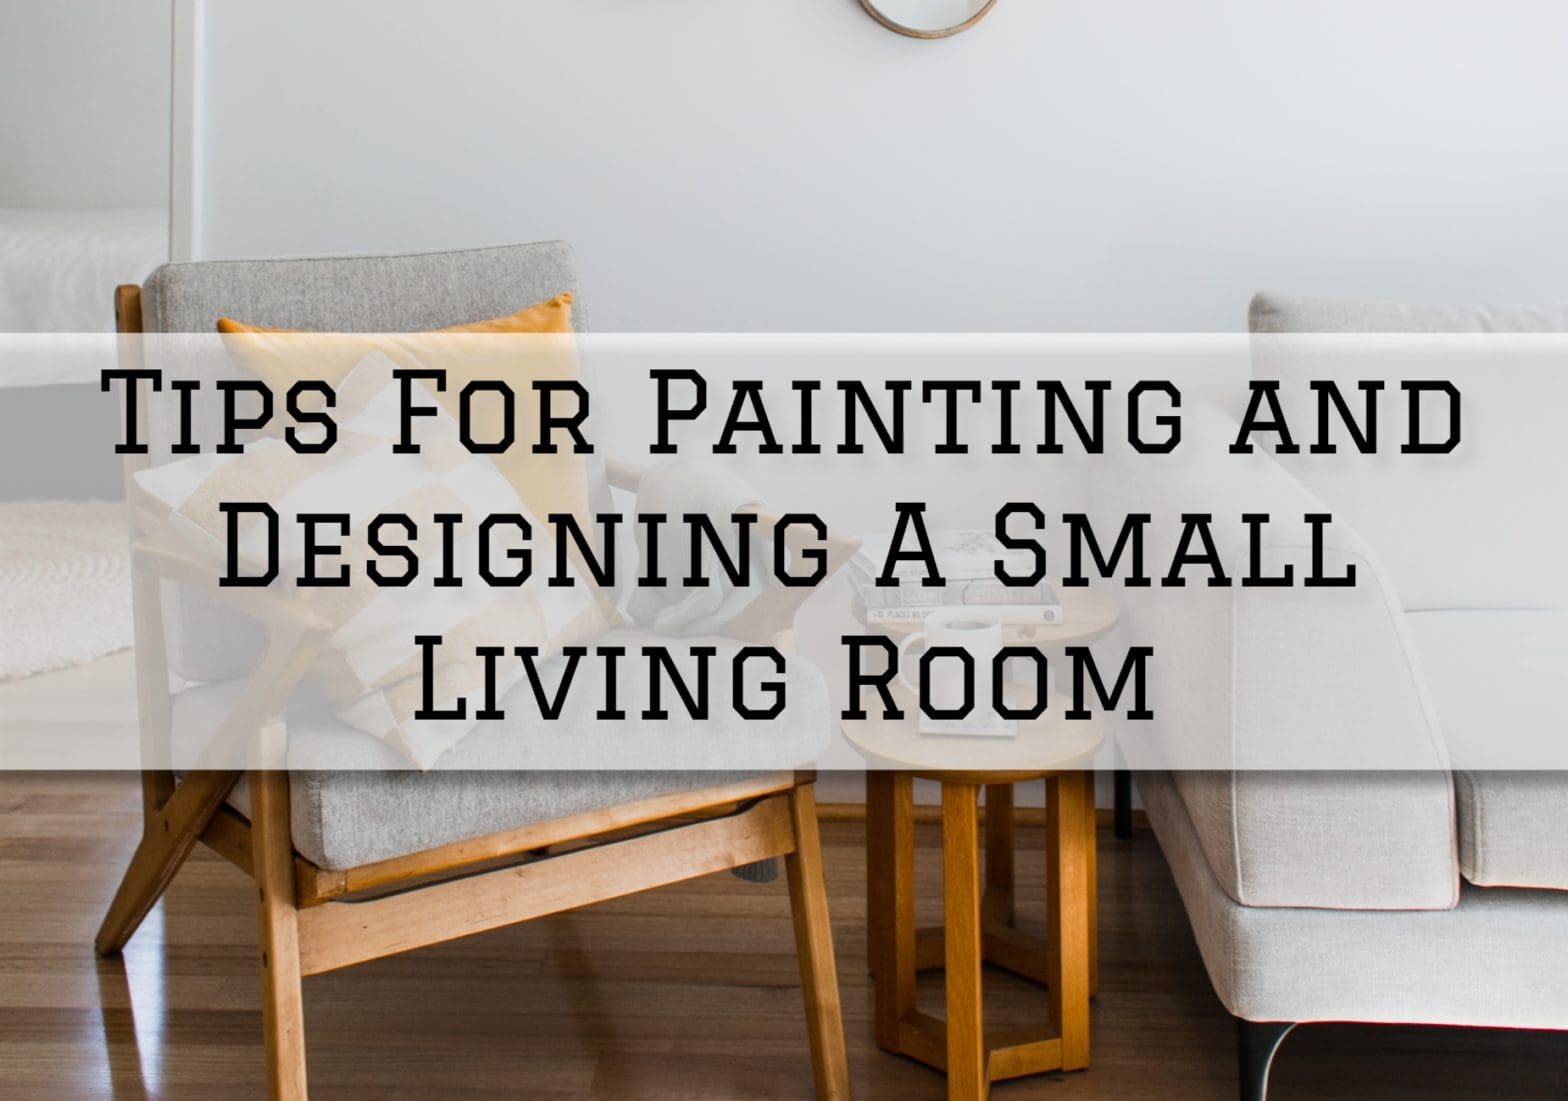 2022-10-15 Painting and Wallpapering Burlington Ontario Painting and Designing Small Living Room